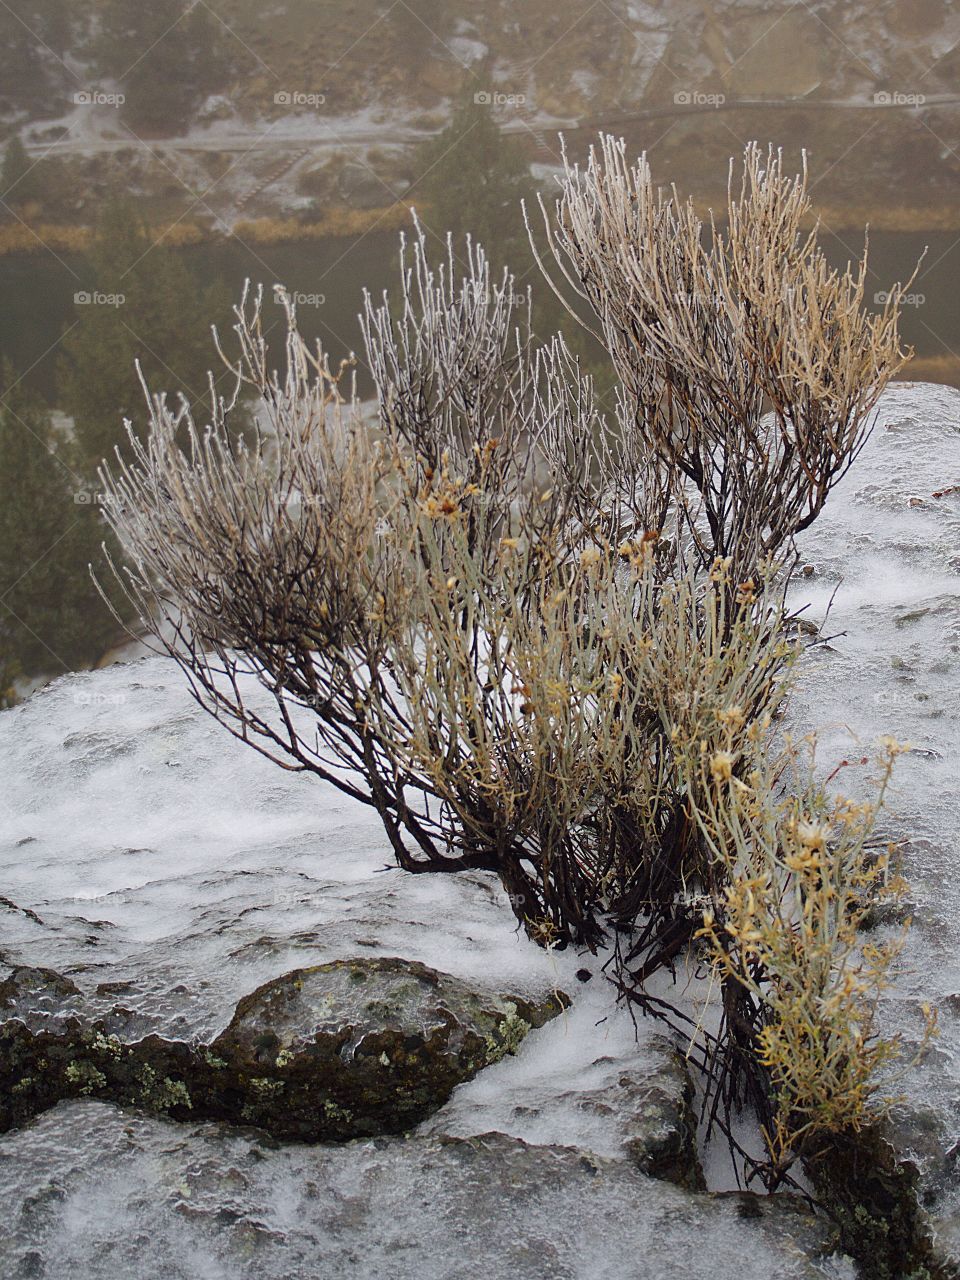 Iced over bushes at the edge of a cliff on a foggy winter day. 